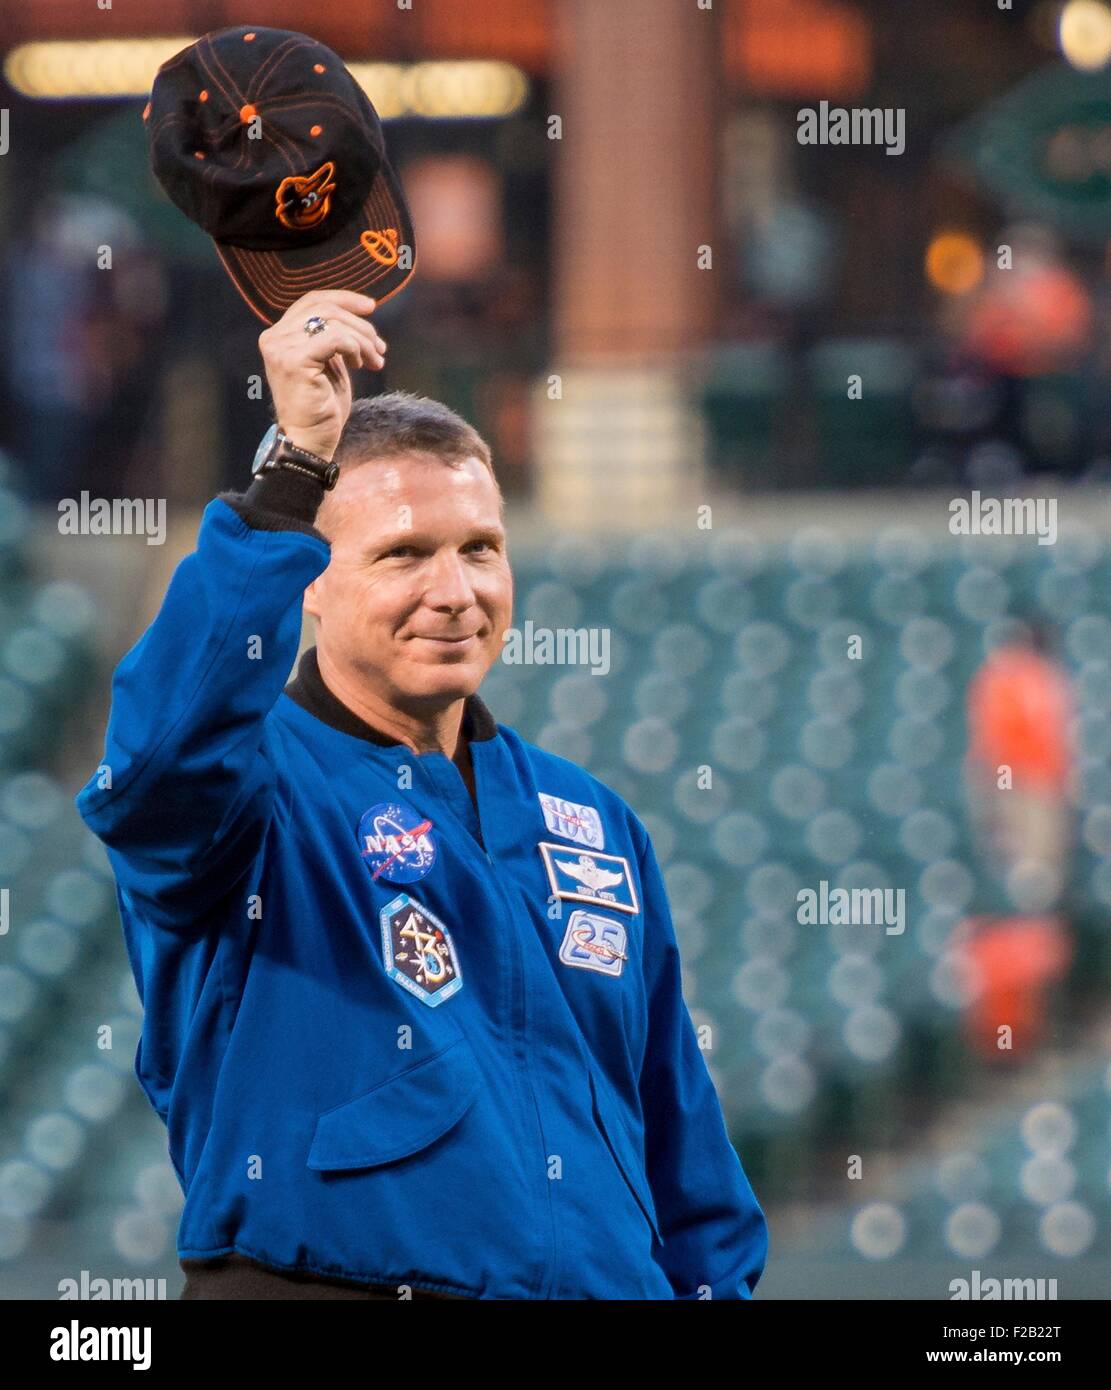 NASA astronaut and Maryland native, Terry Virts waves as he is introduced before throwing the ceremonial first pitch before the Boston Red Sox take on the Baltimore Orioles at Camden Yards baseball stadium September 14, 2015 in Baltimore, Maryland. Virts spend 199 days aboard the International Space Station. Stock Photo